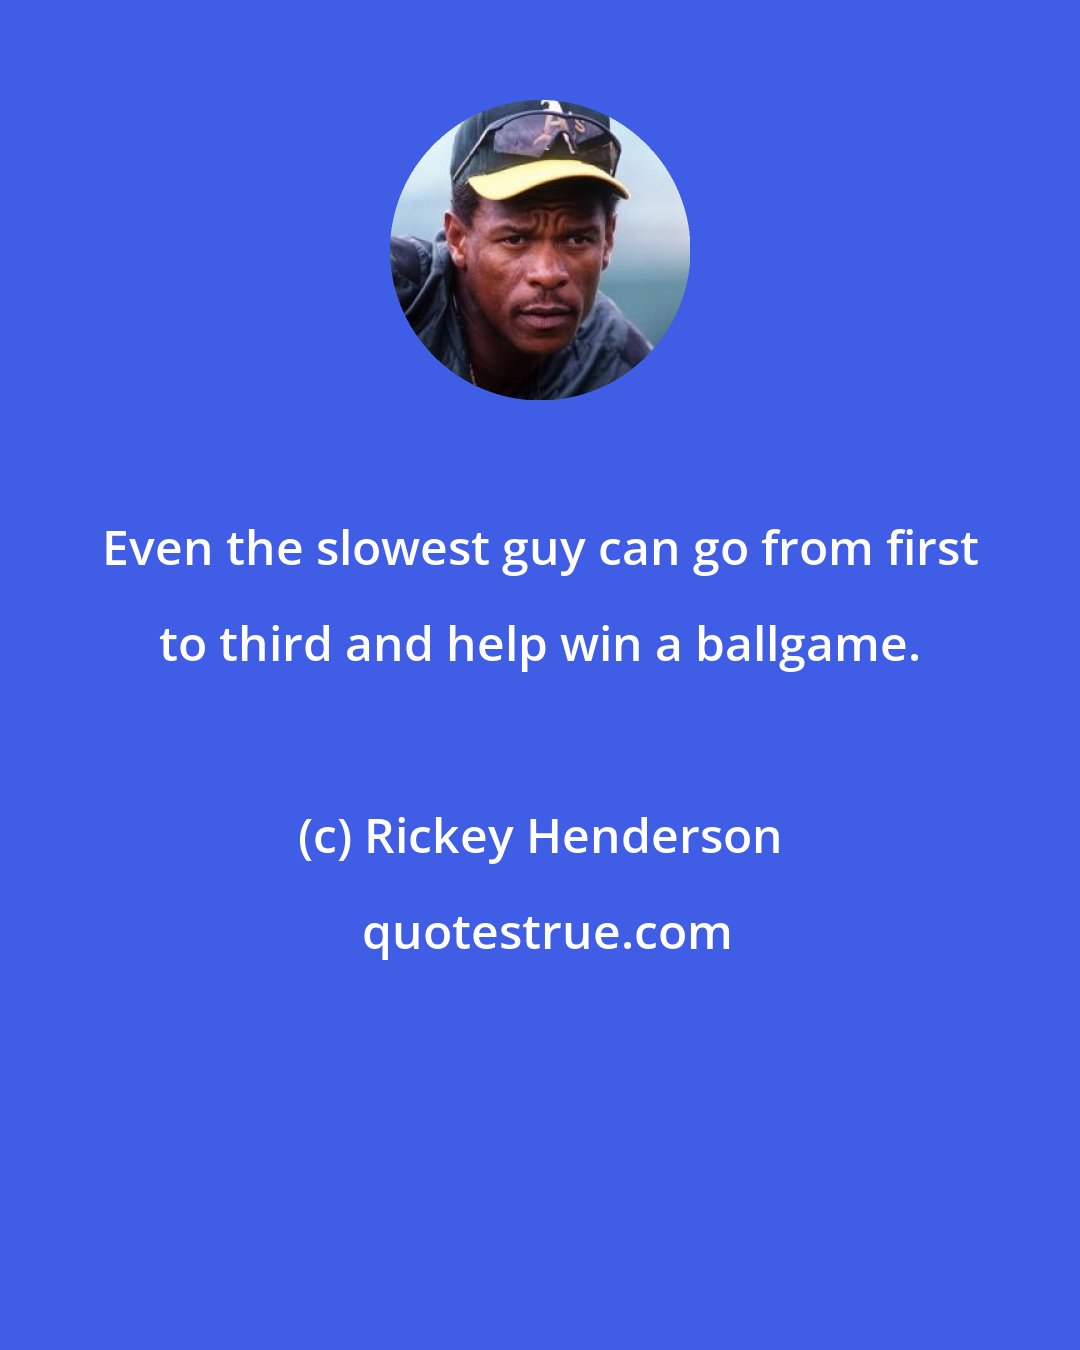 Rickey Henderson: Even the slowest guy can go from first to third and help win a ballgame.